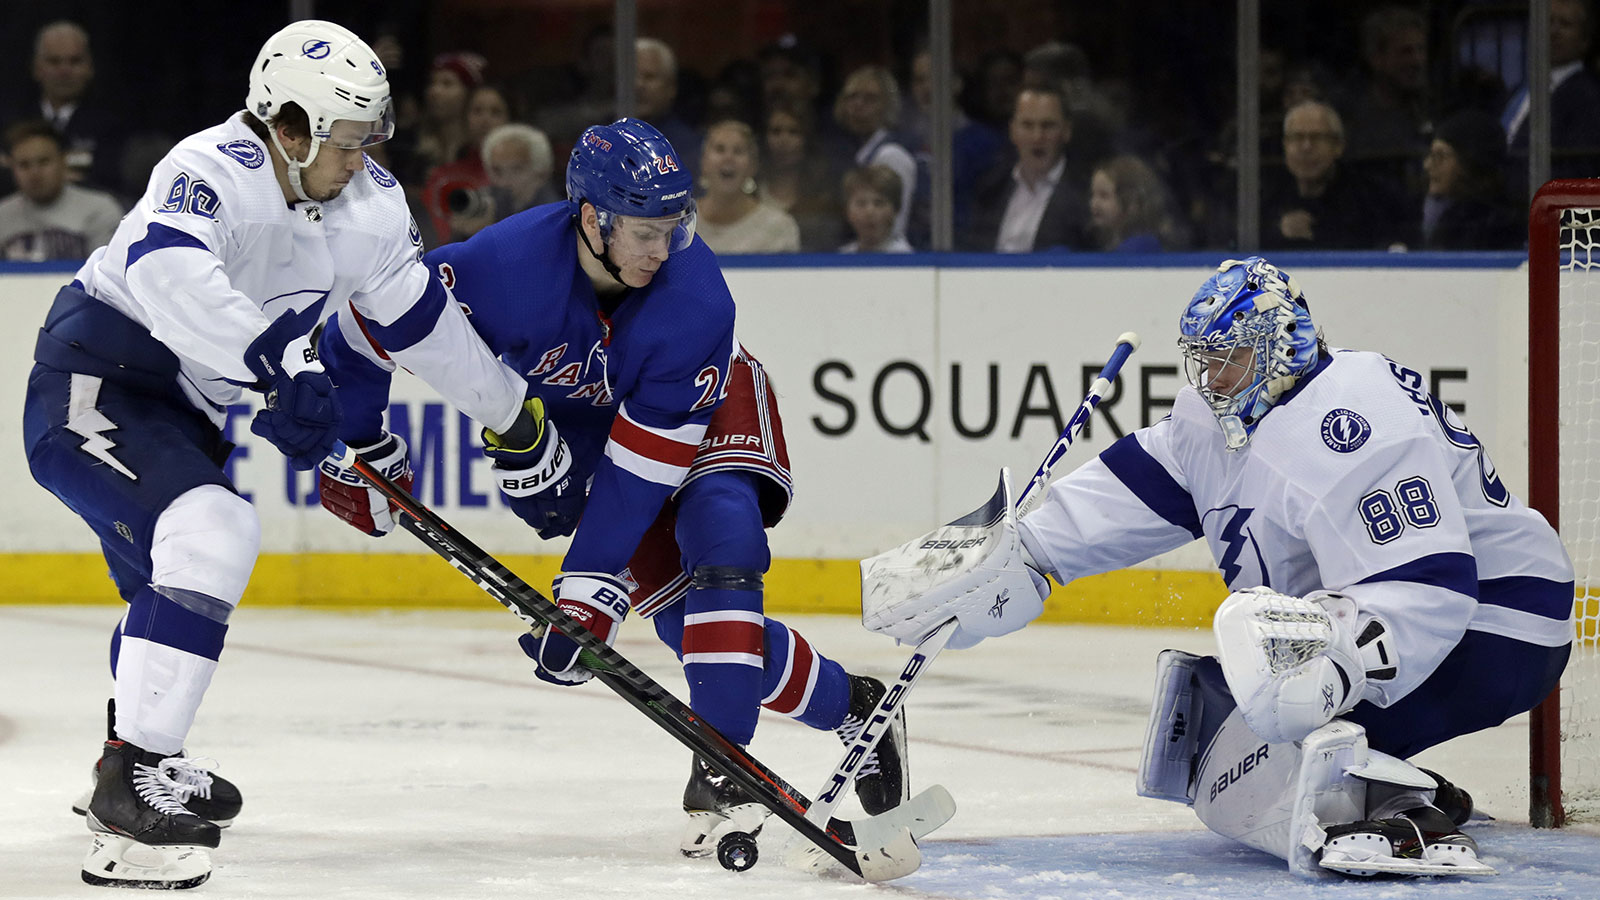 Lightning allow 3 goals late in final period, begin road trip with loss to Rangers